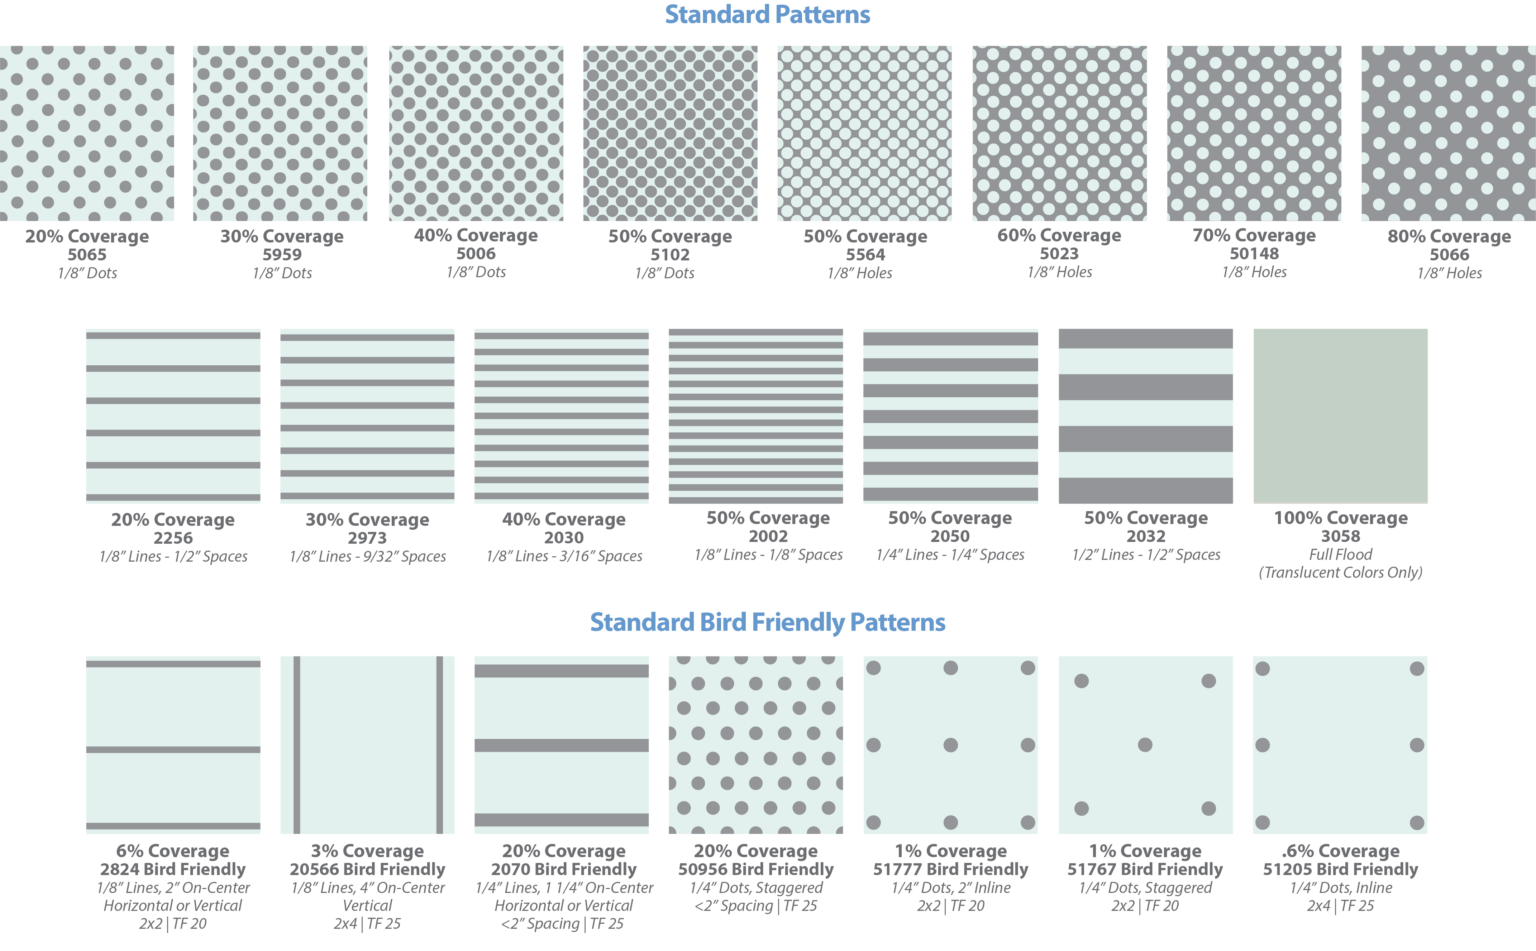 Standard Patterns for Architectural Glass